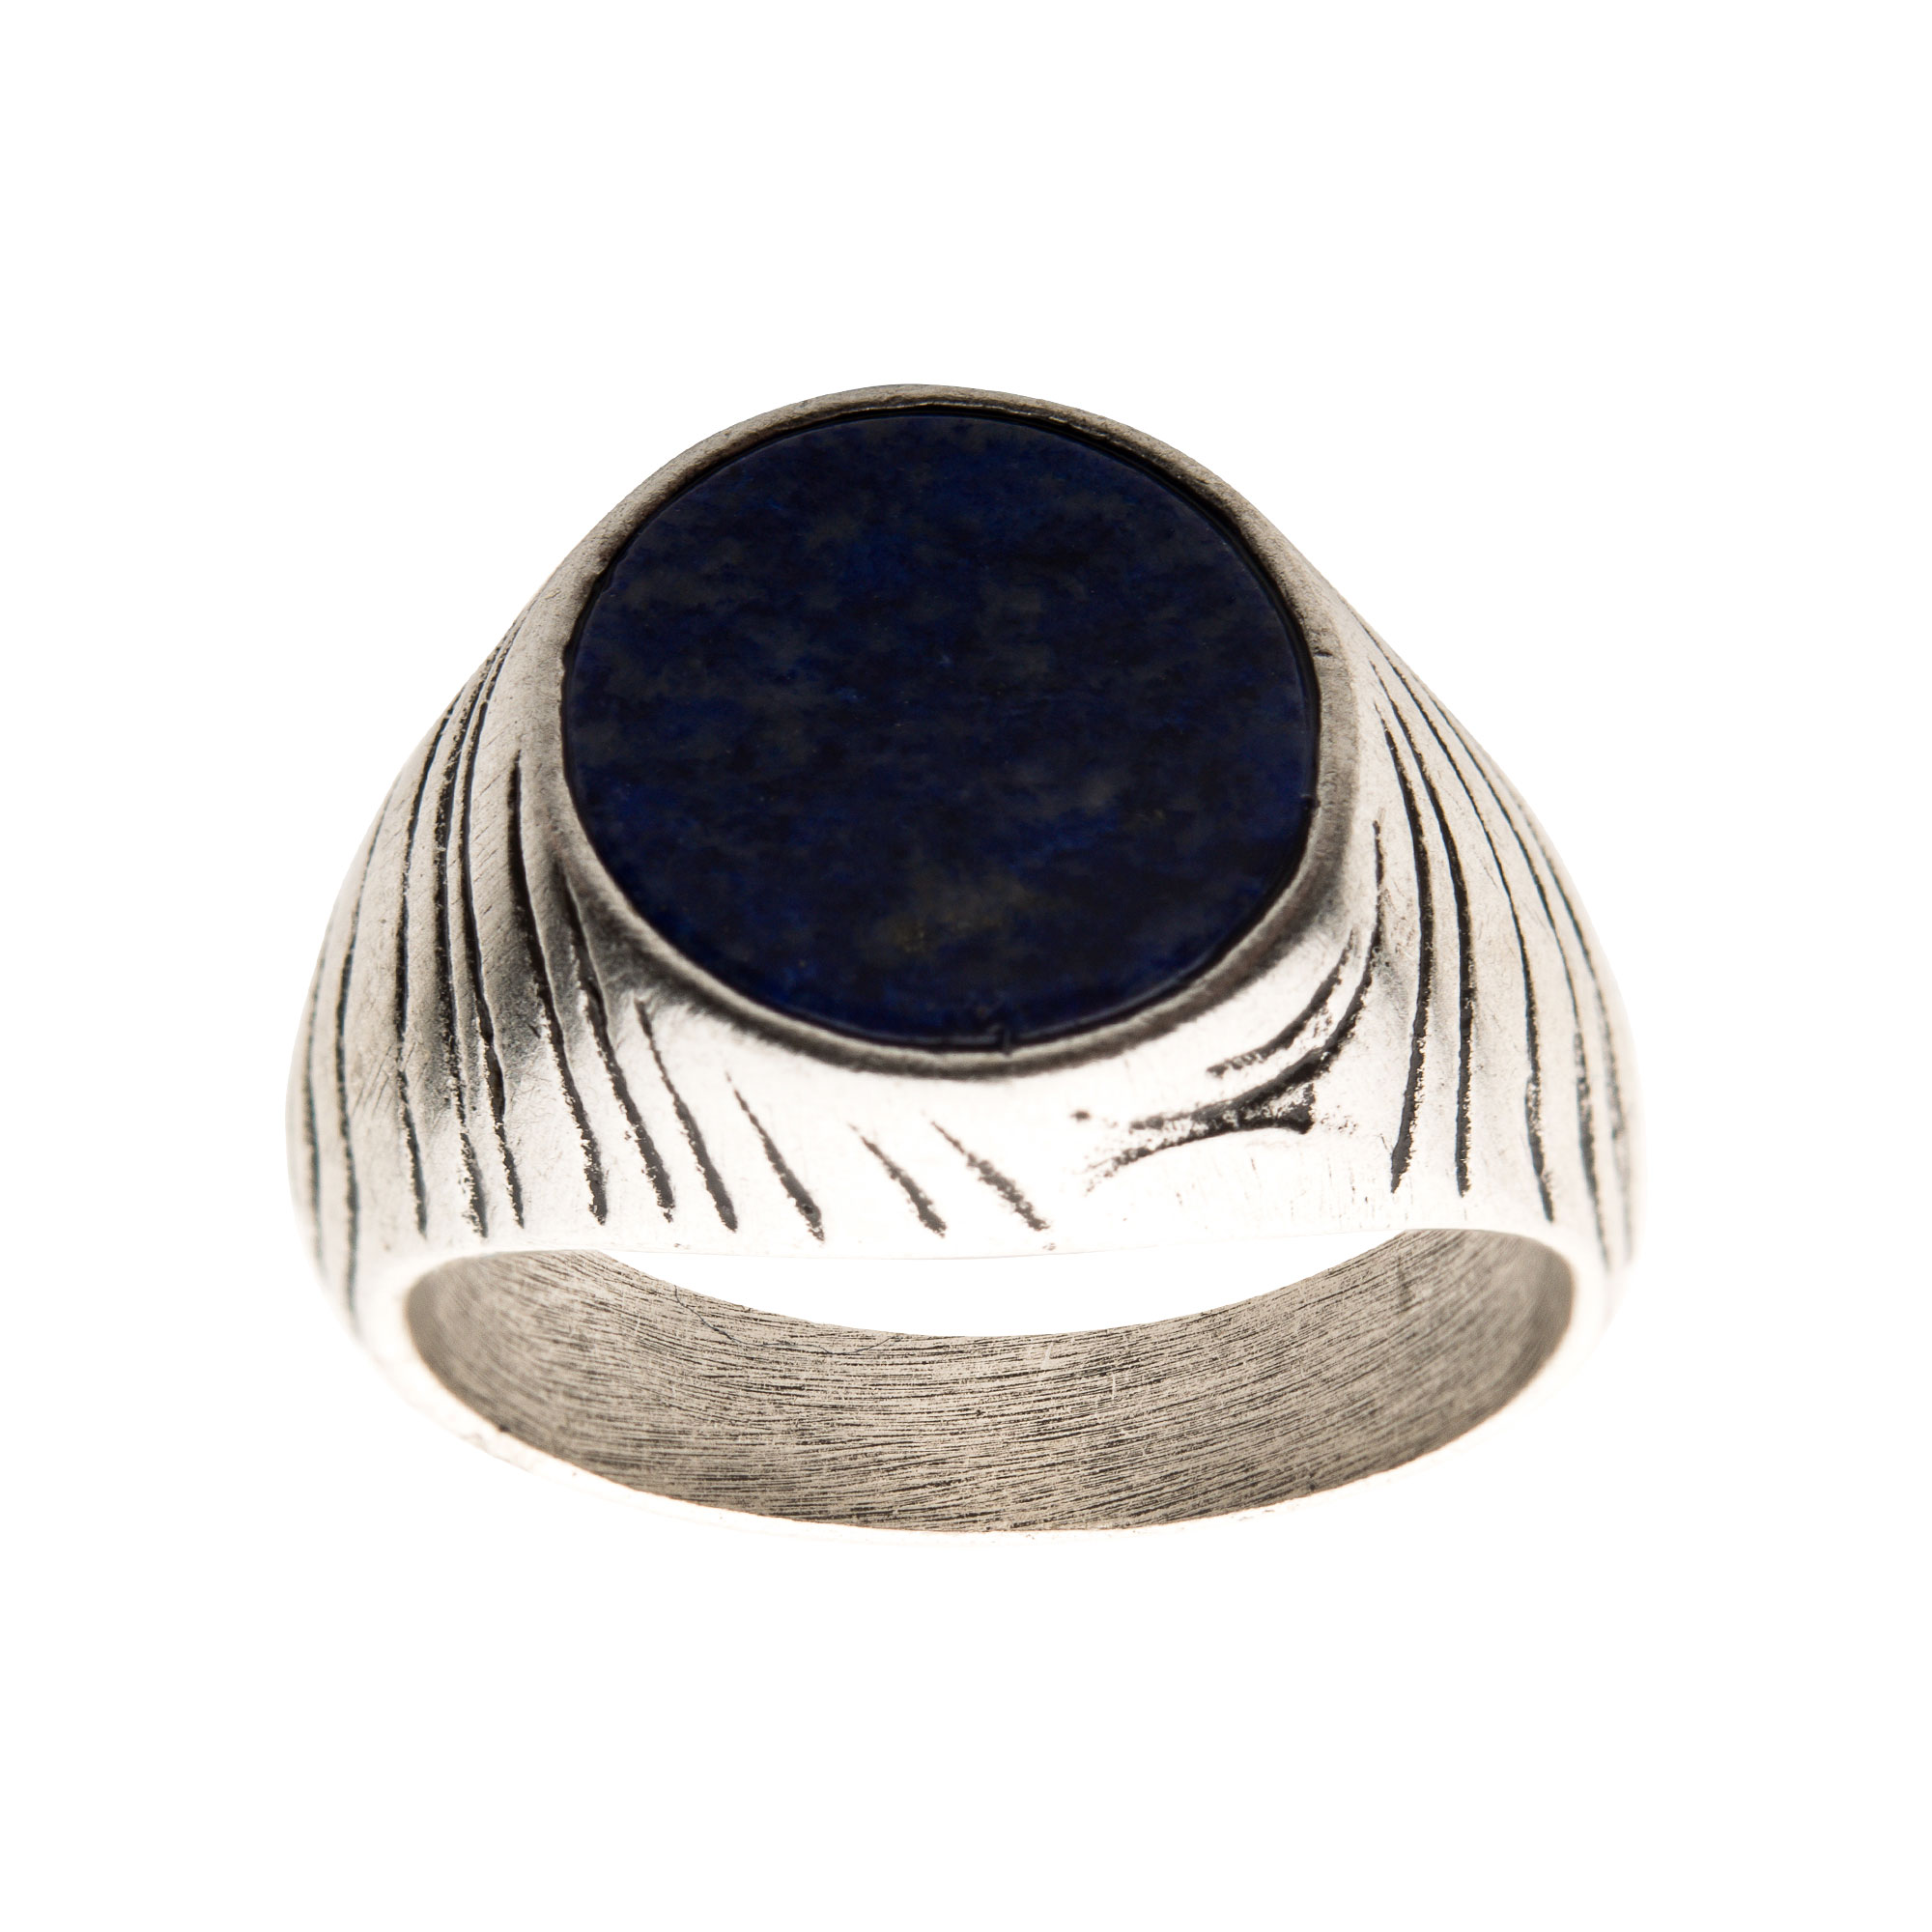 Stainless Steel Silver Plated with Lapis Stone Ring Image 2 P.K. Bennett Jewelers Mundelein, IL